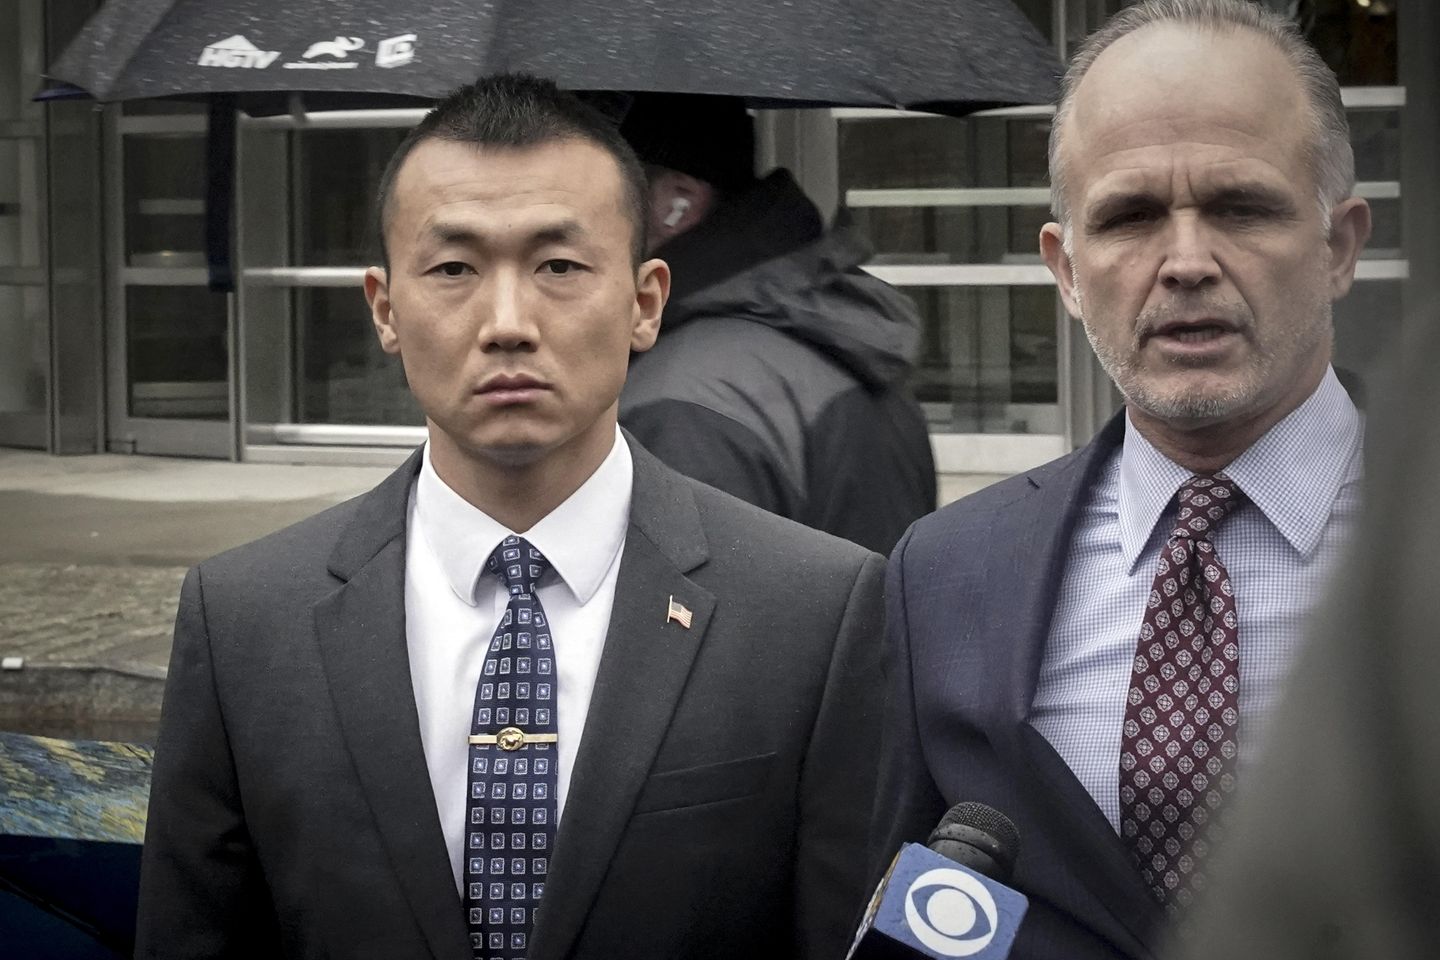 Charges dropped against NYPD cop accused of spying for China